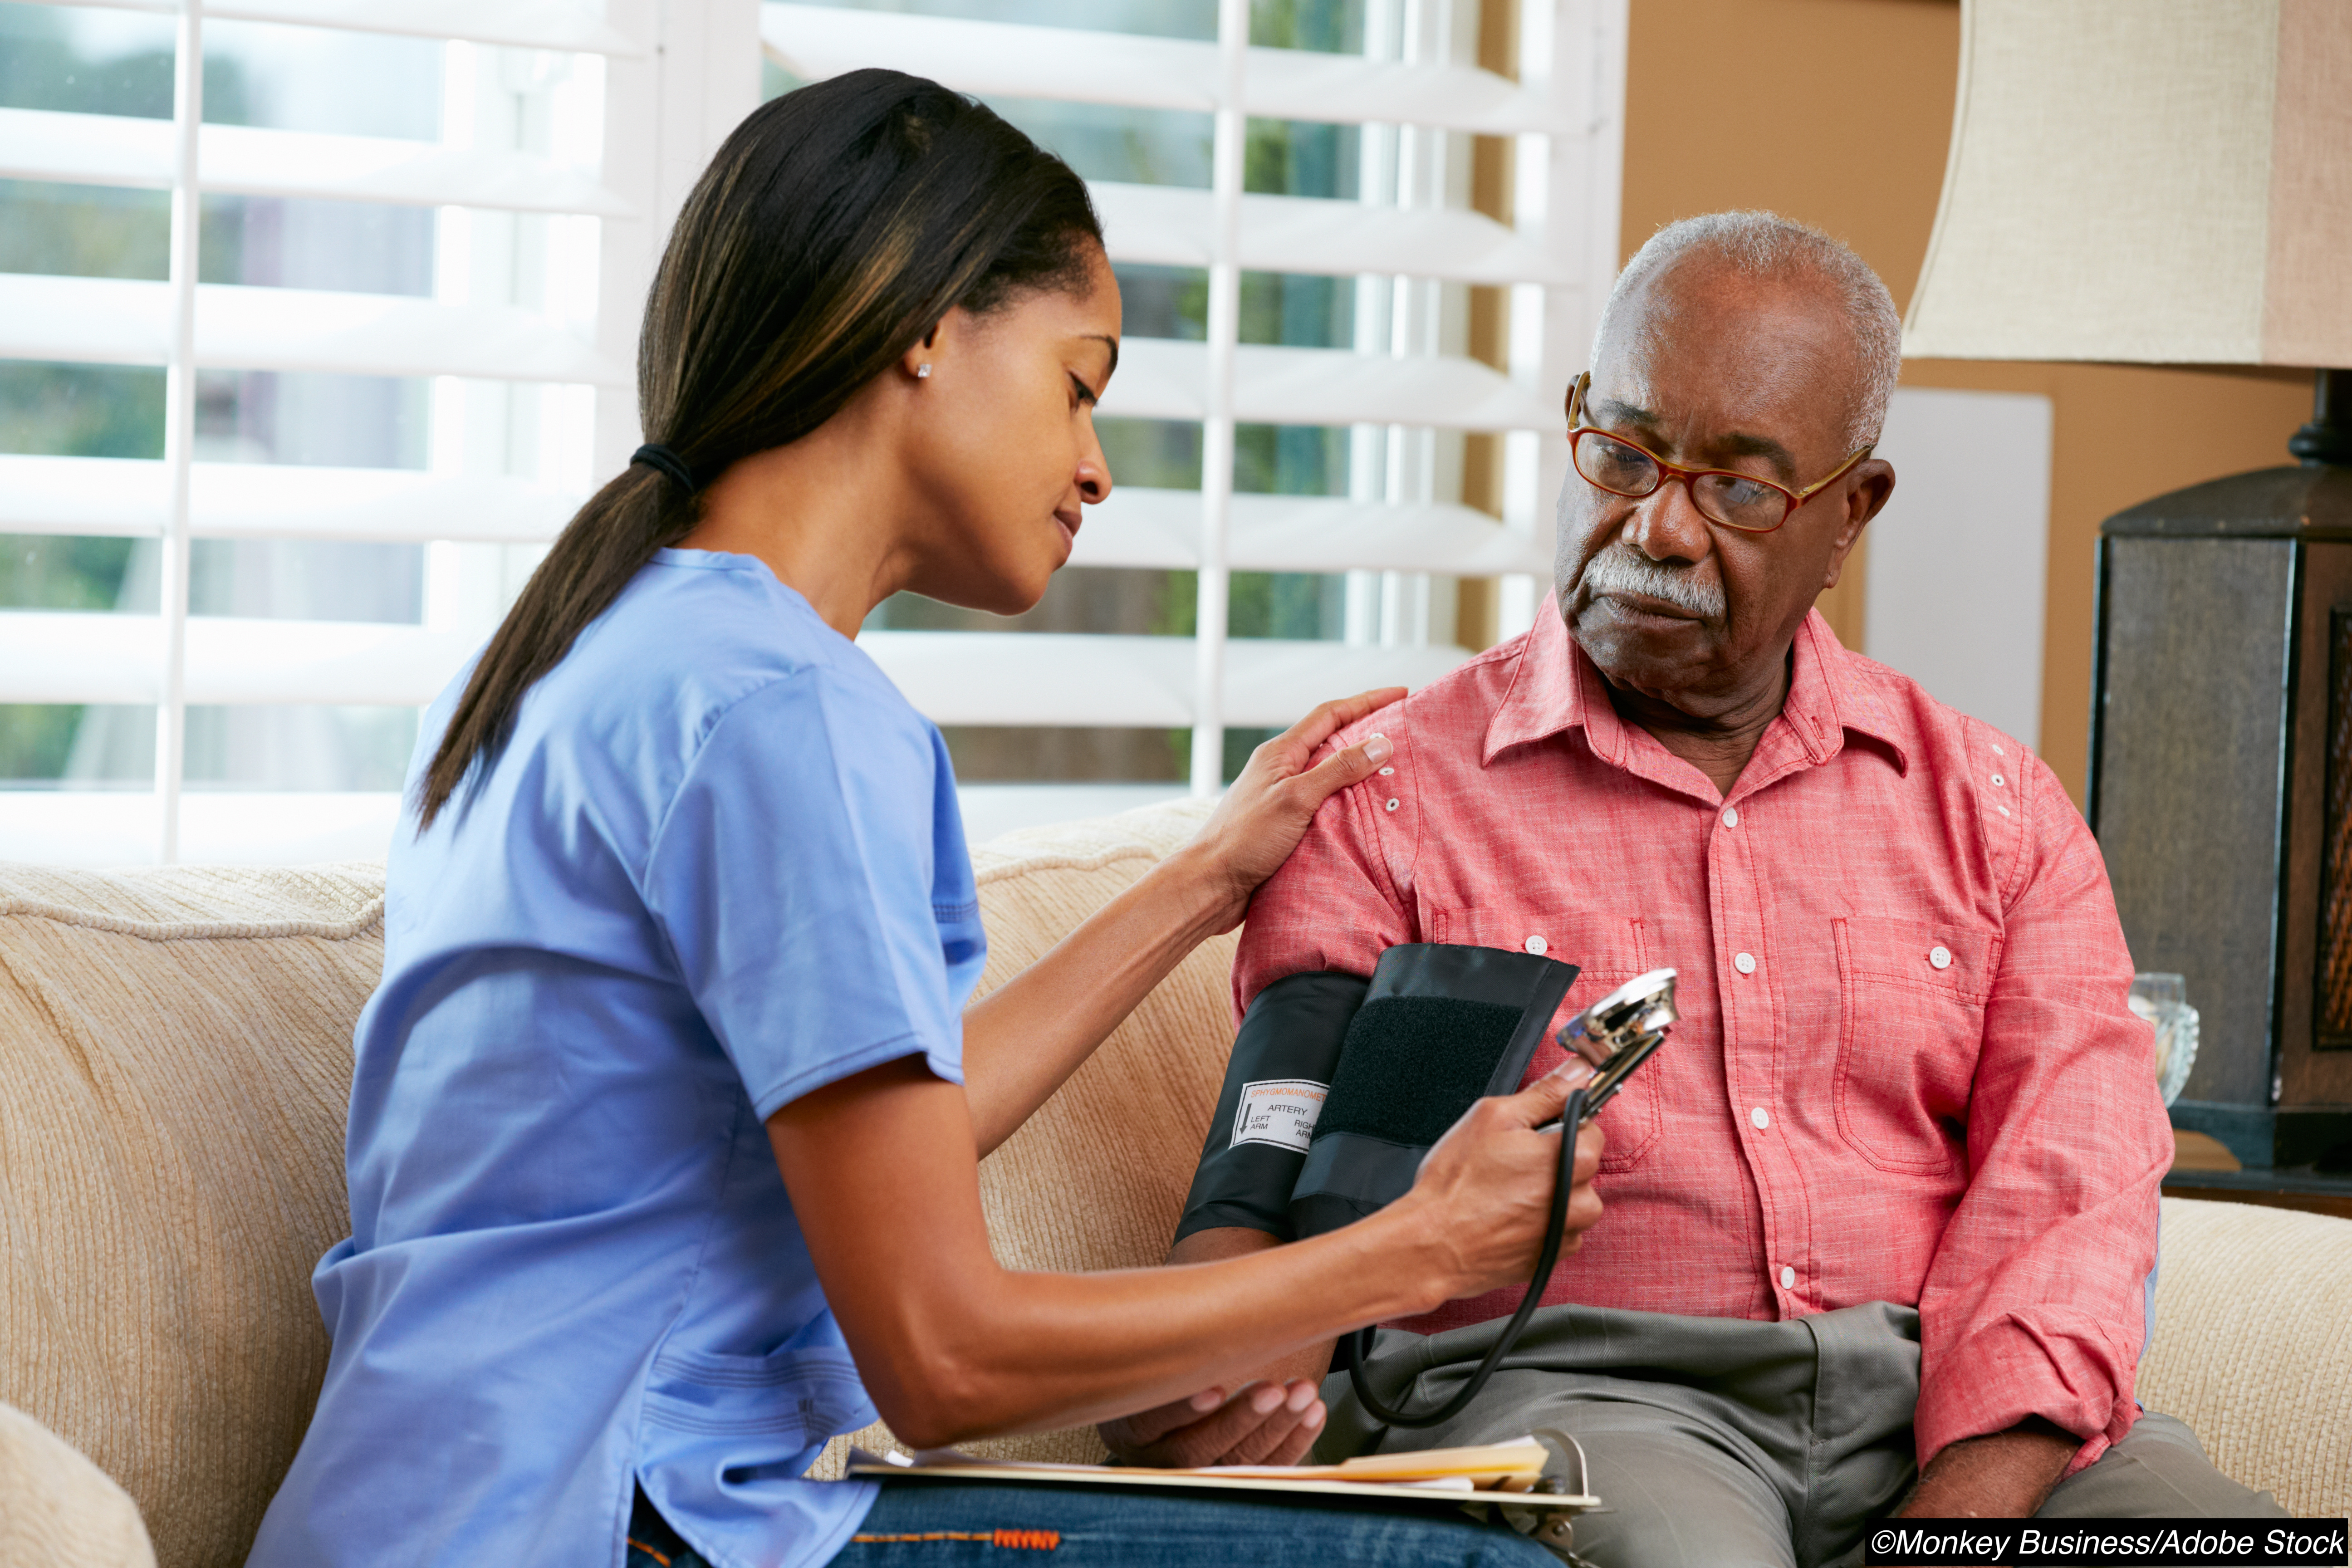 Standardized Approach to HTN May Reduce Disparities in Care